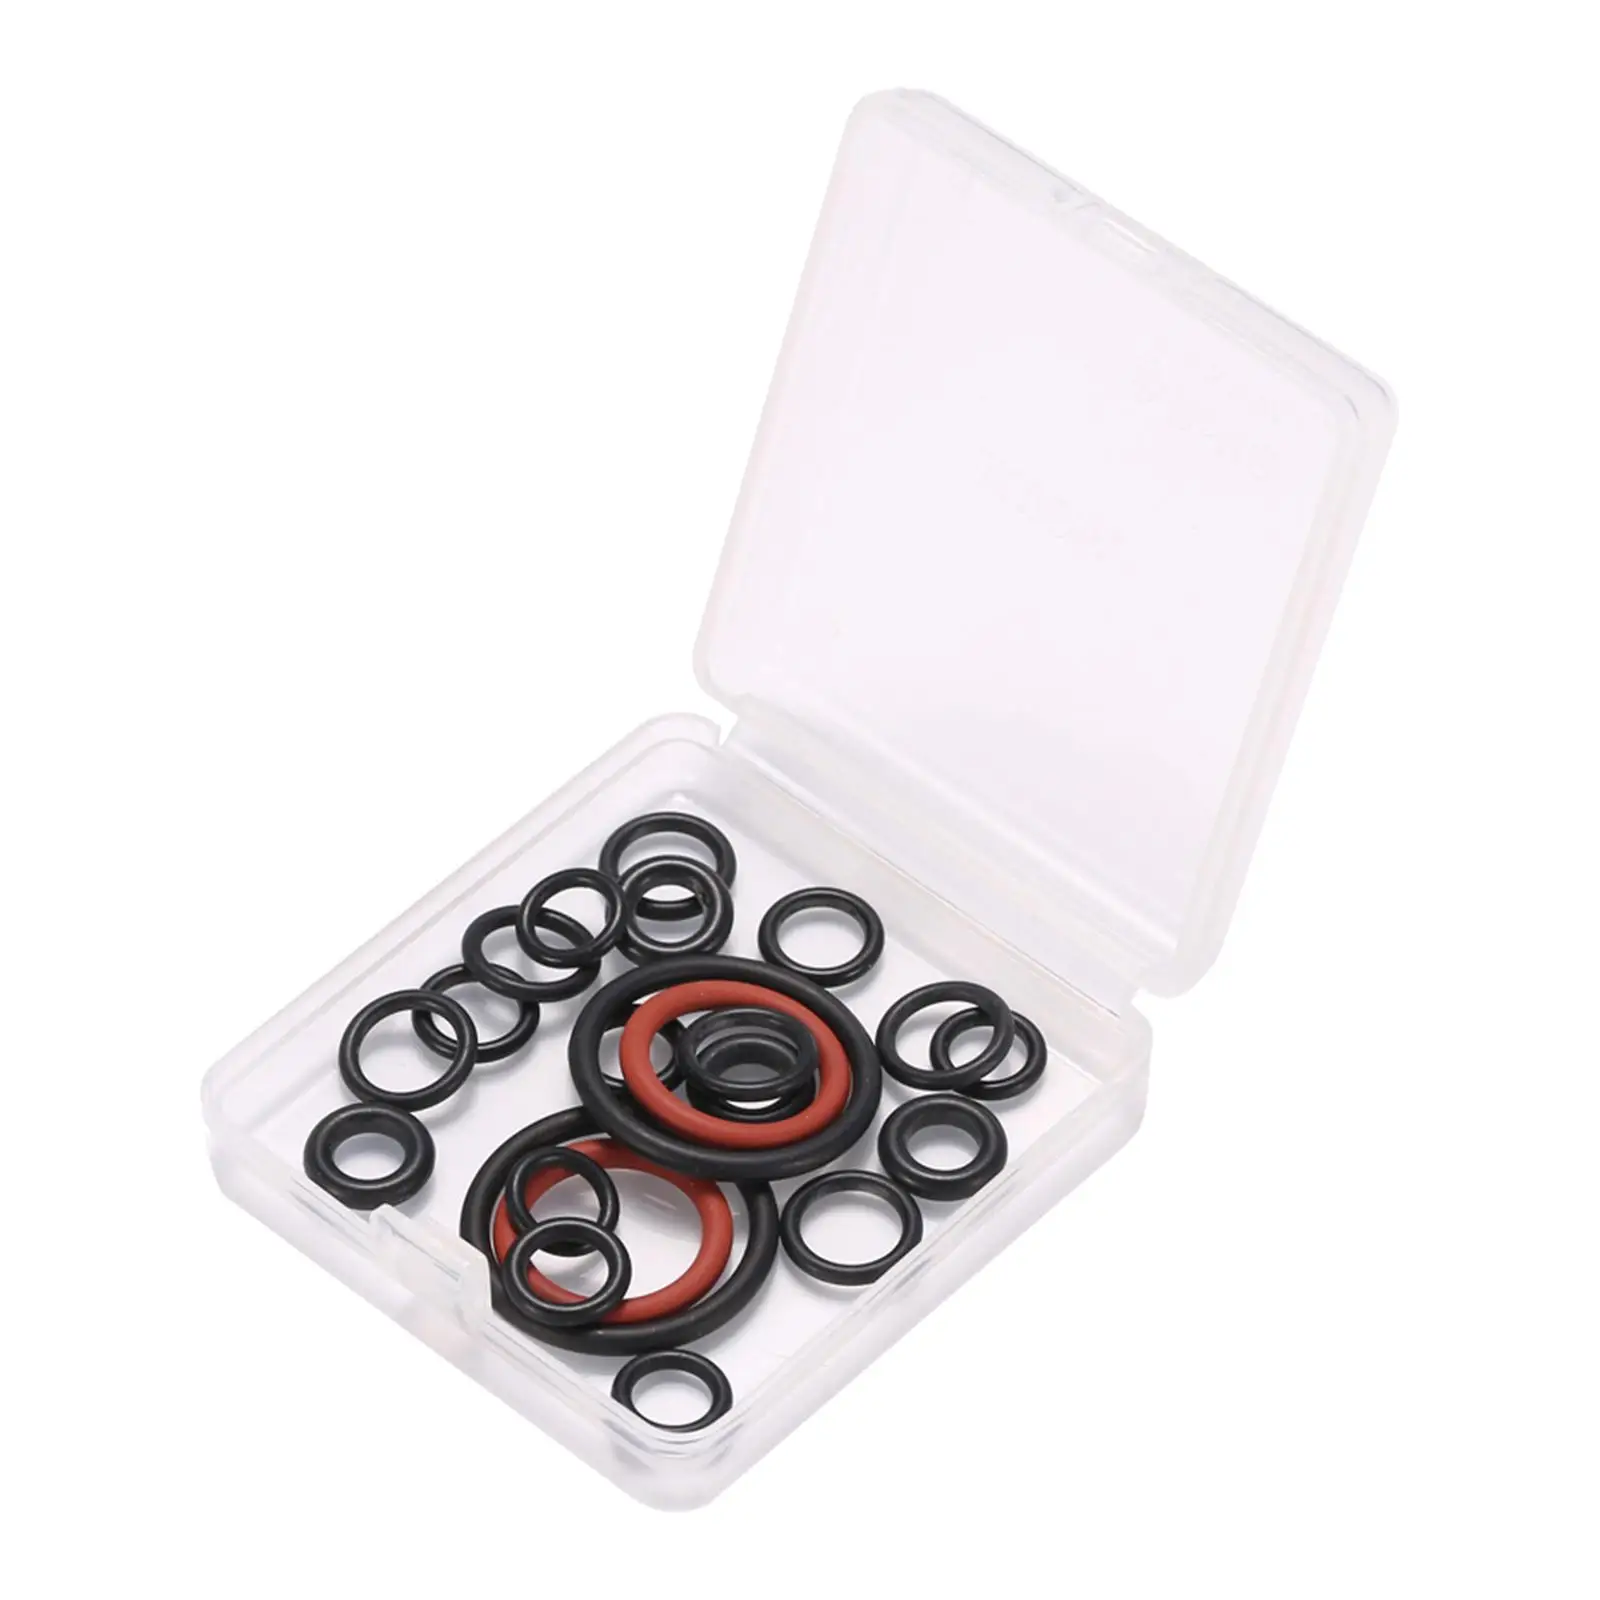 Pack of 22 Sealing Rings Hose Nozzle Jet Lance Seals Gasket Washers O-Rings for Karcher Detailed Nozzles